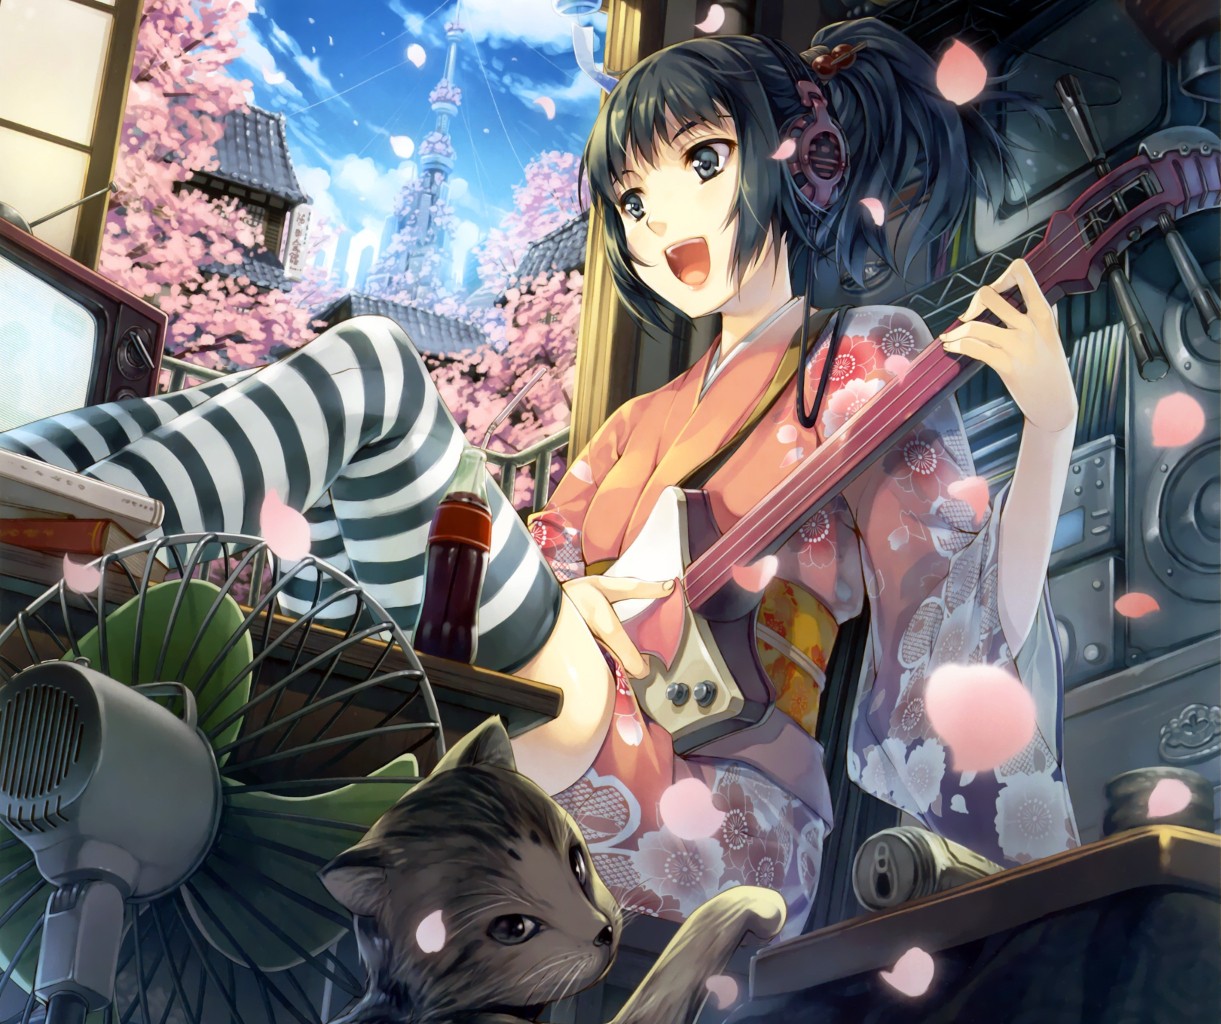 Anime 1221x1024 guitar anime girls city Asian architecture Japanese clothes original characters anime kimono headphones brunette short hair cherry blossom open mouth blue eyes musical instrument cats fans women indoors black hair striped stockings stockings